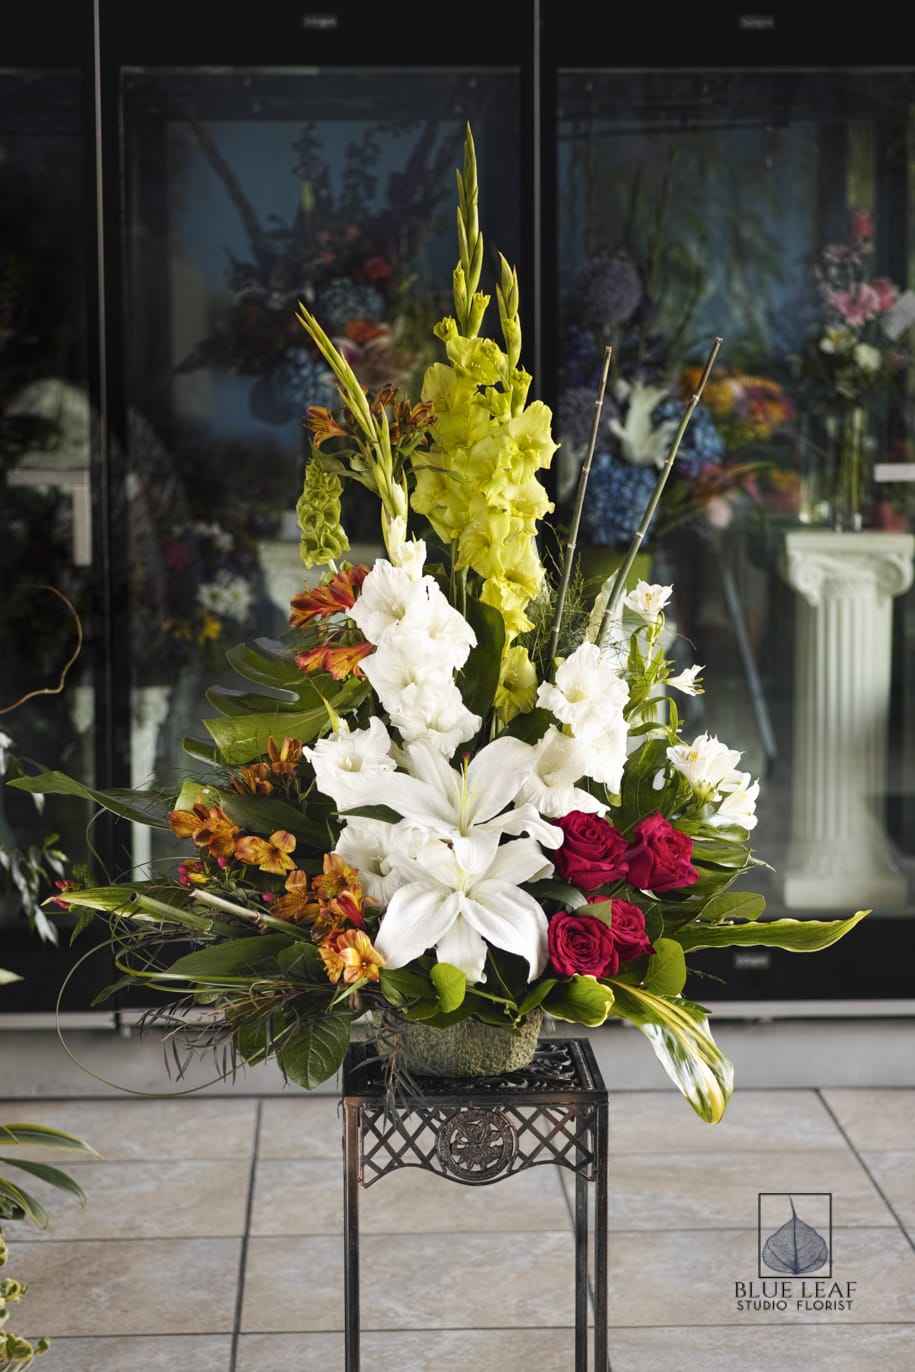 A sophisticated spray of yellow gladiolus, white lilies, spray roses, and orange